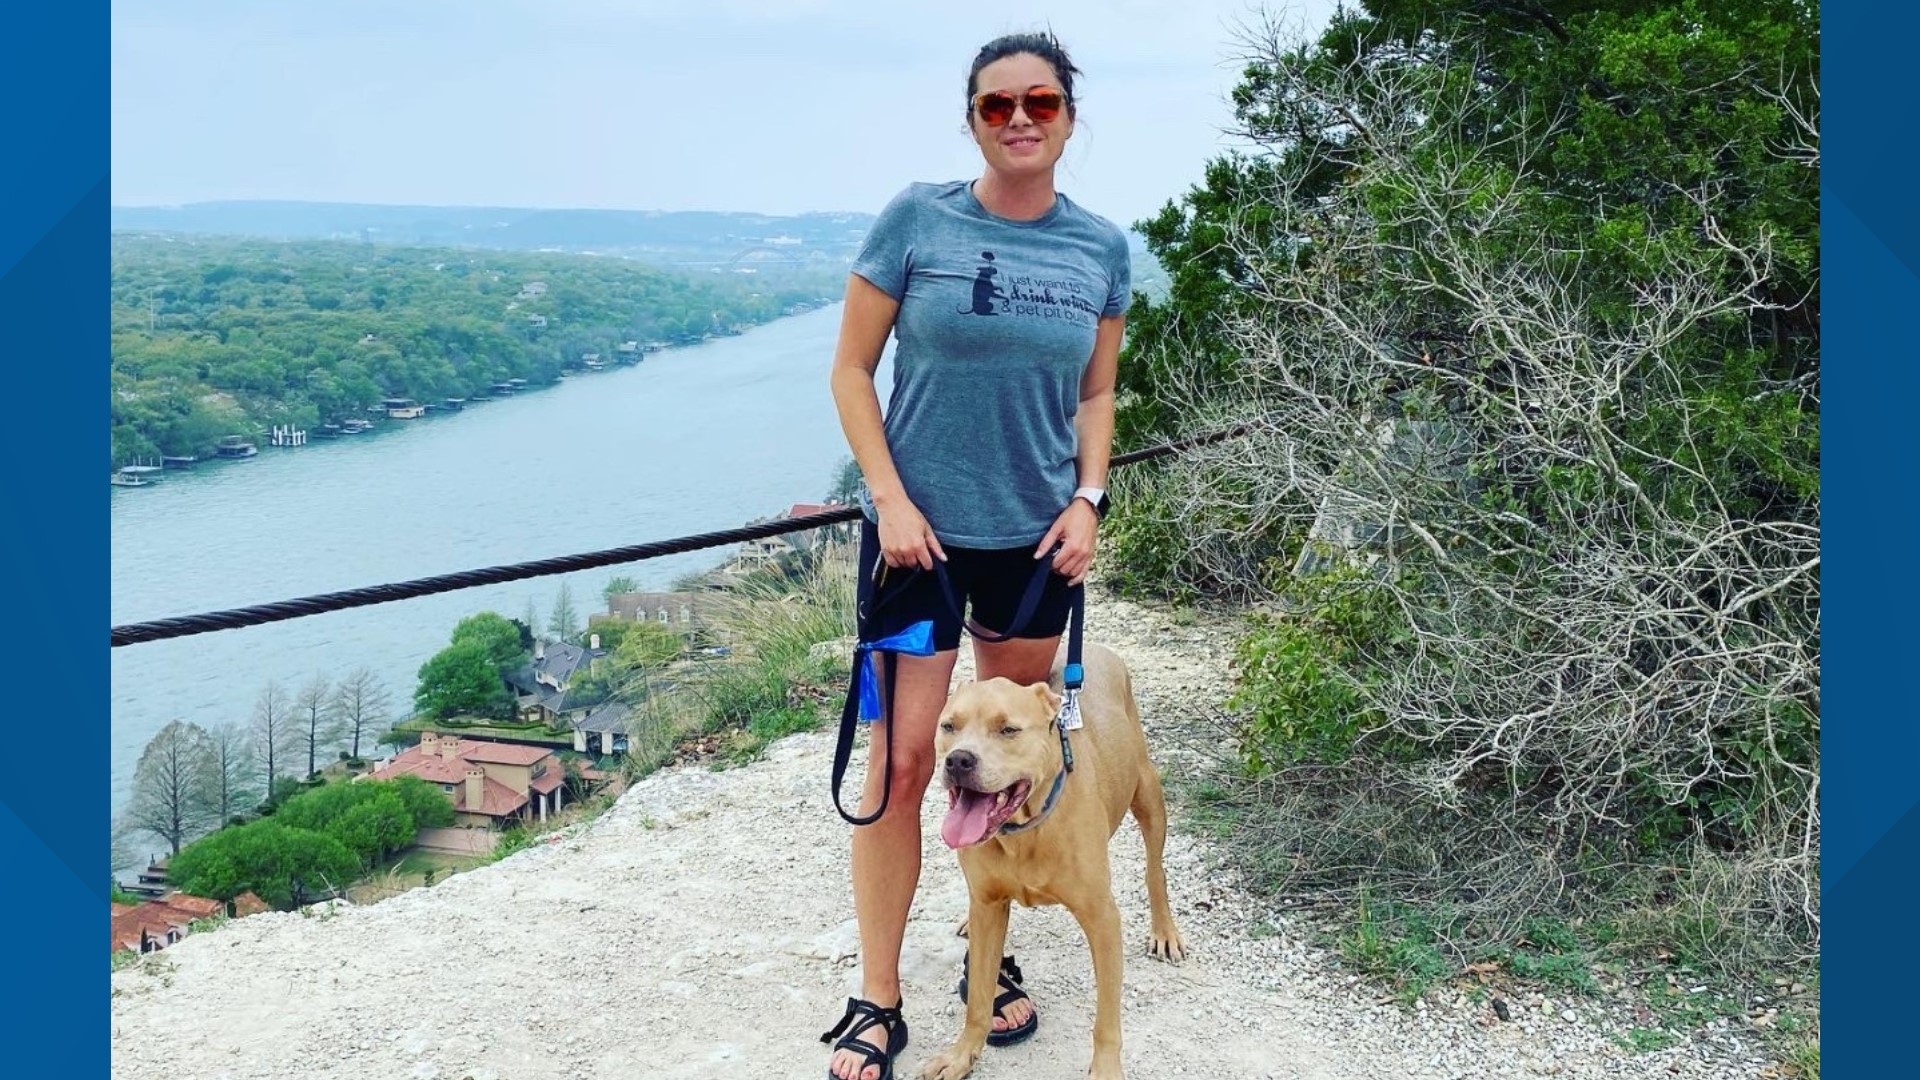 Many are continuing to thrive working remotely and even using that as a way to cross off a bucket list adventure. That includes one woman who grew up in our area.